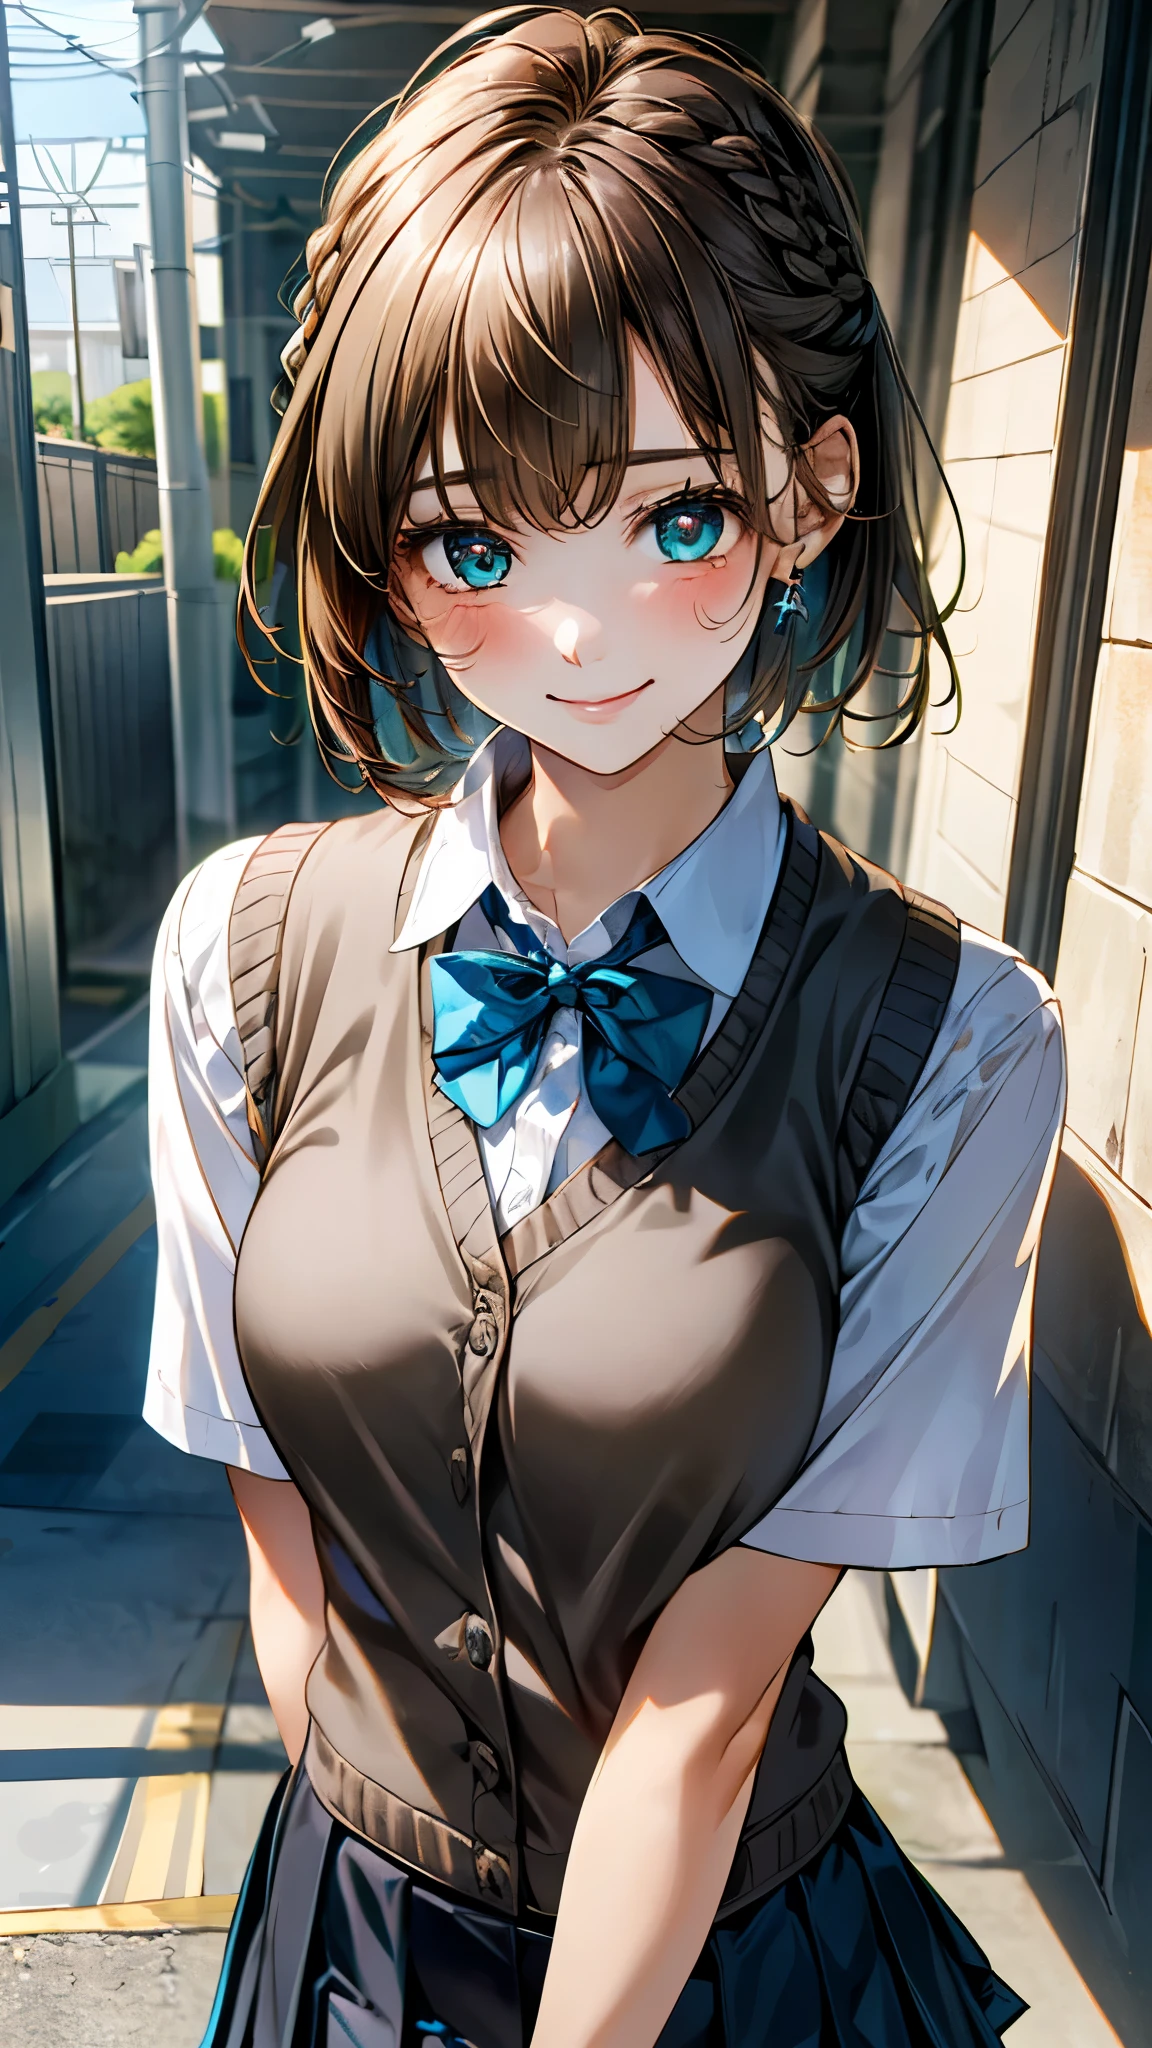 (masterpiece:1.2, top-quality), (realistic, photorealistic:1.4), beautiful illustration, (natural side lighting, movie lighting), 
looking at viewer, upper body, 1 girl, japanese, high school girl, 12 years old, perfect face, cute and symmetrical face, shiny skin, 
(short hair, braid, light brown hair), bangs, emerald greeneyes, big eyes, long eye lasher, (medium breasts), 
beautiful hair, beautiful face, beautiful detailed eyes, beautiful clavicle, beautiful body, beautiful chest, beautiful thigh, beautiful legs, beautiful fingers, 
((white collared shirts, light blue bow tie, dark grey pleated mini skirt, yellow grown knitted vest)), 
(beautiful scenery), evening, (school hallway), walking, ((breast grab)), (in heat, aroused, seductive smile),